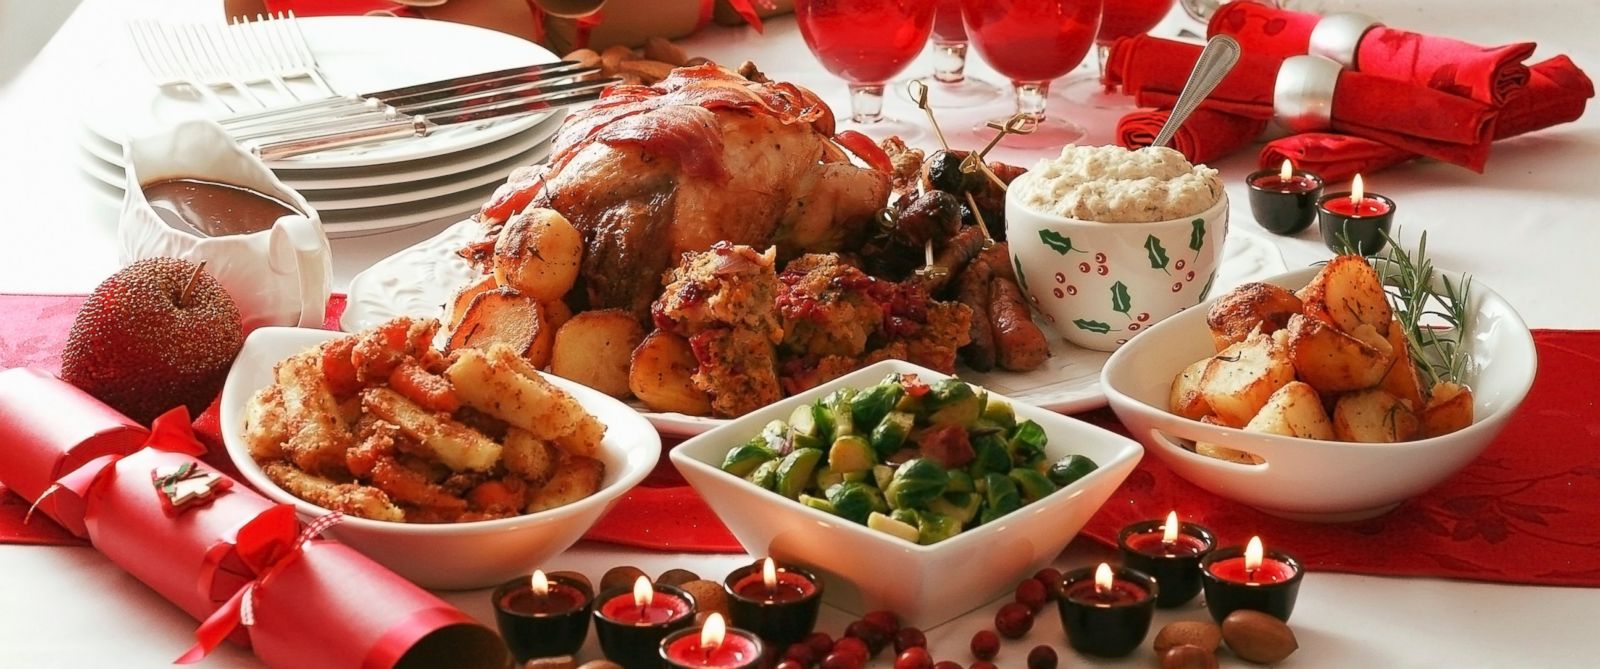 What percentage of American homes eat turkey on Christmas?